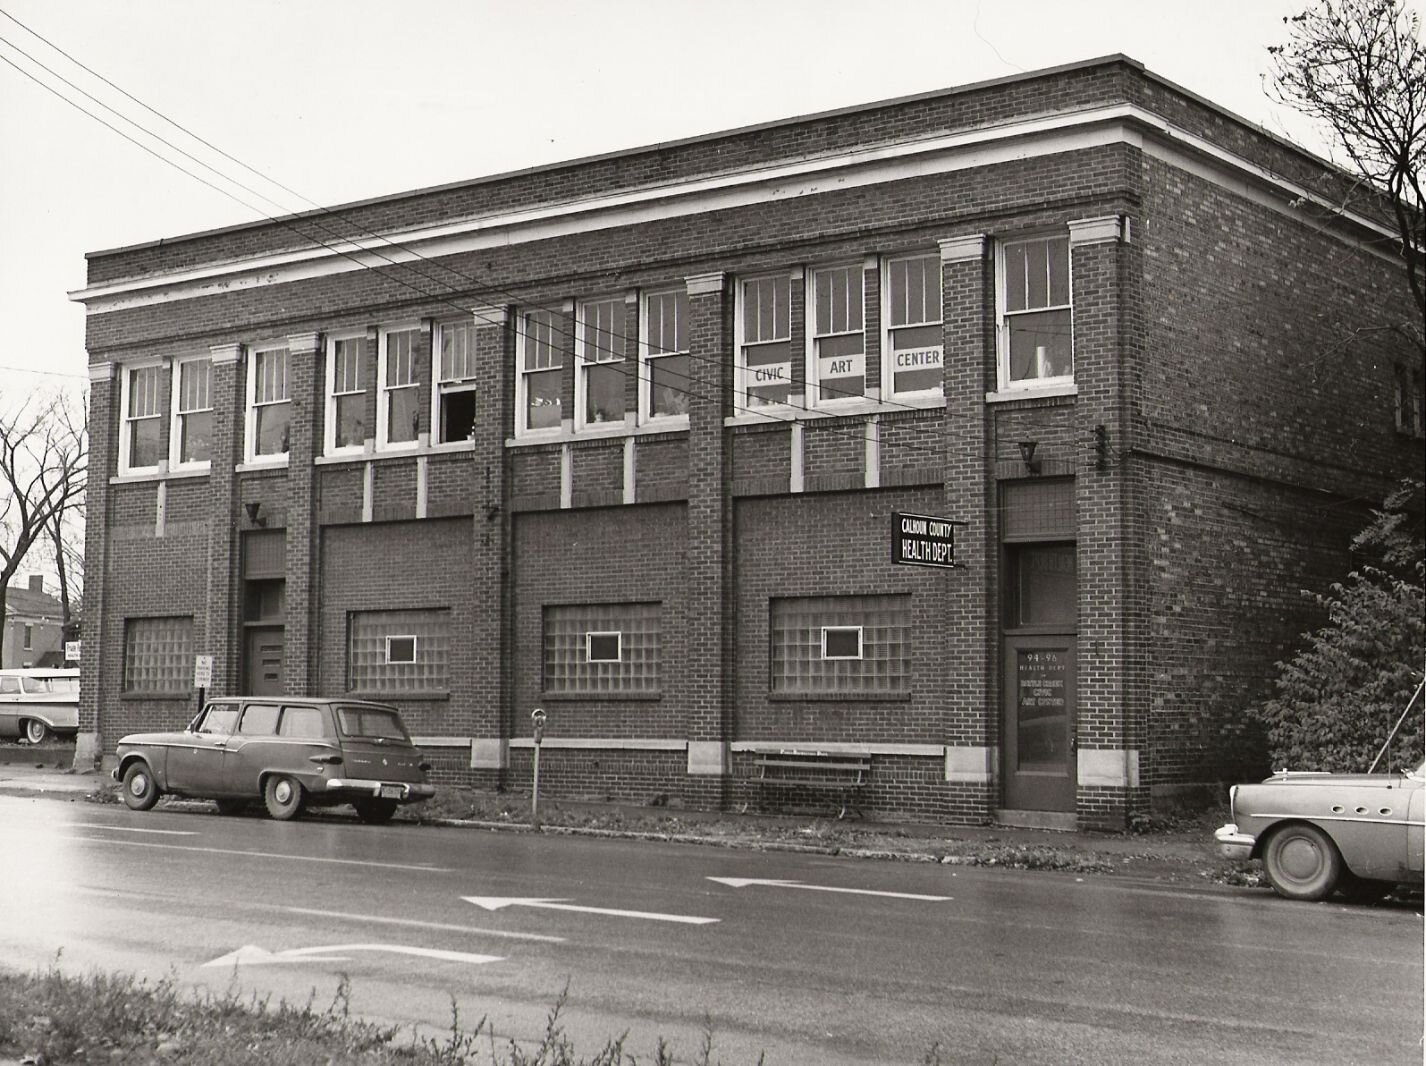 The Art Center was once located on Jackson Street.